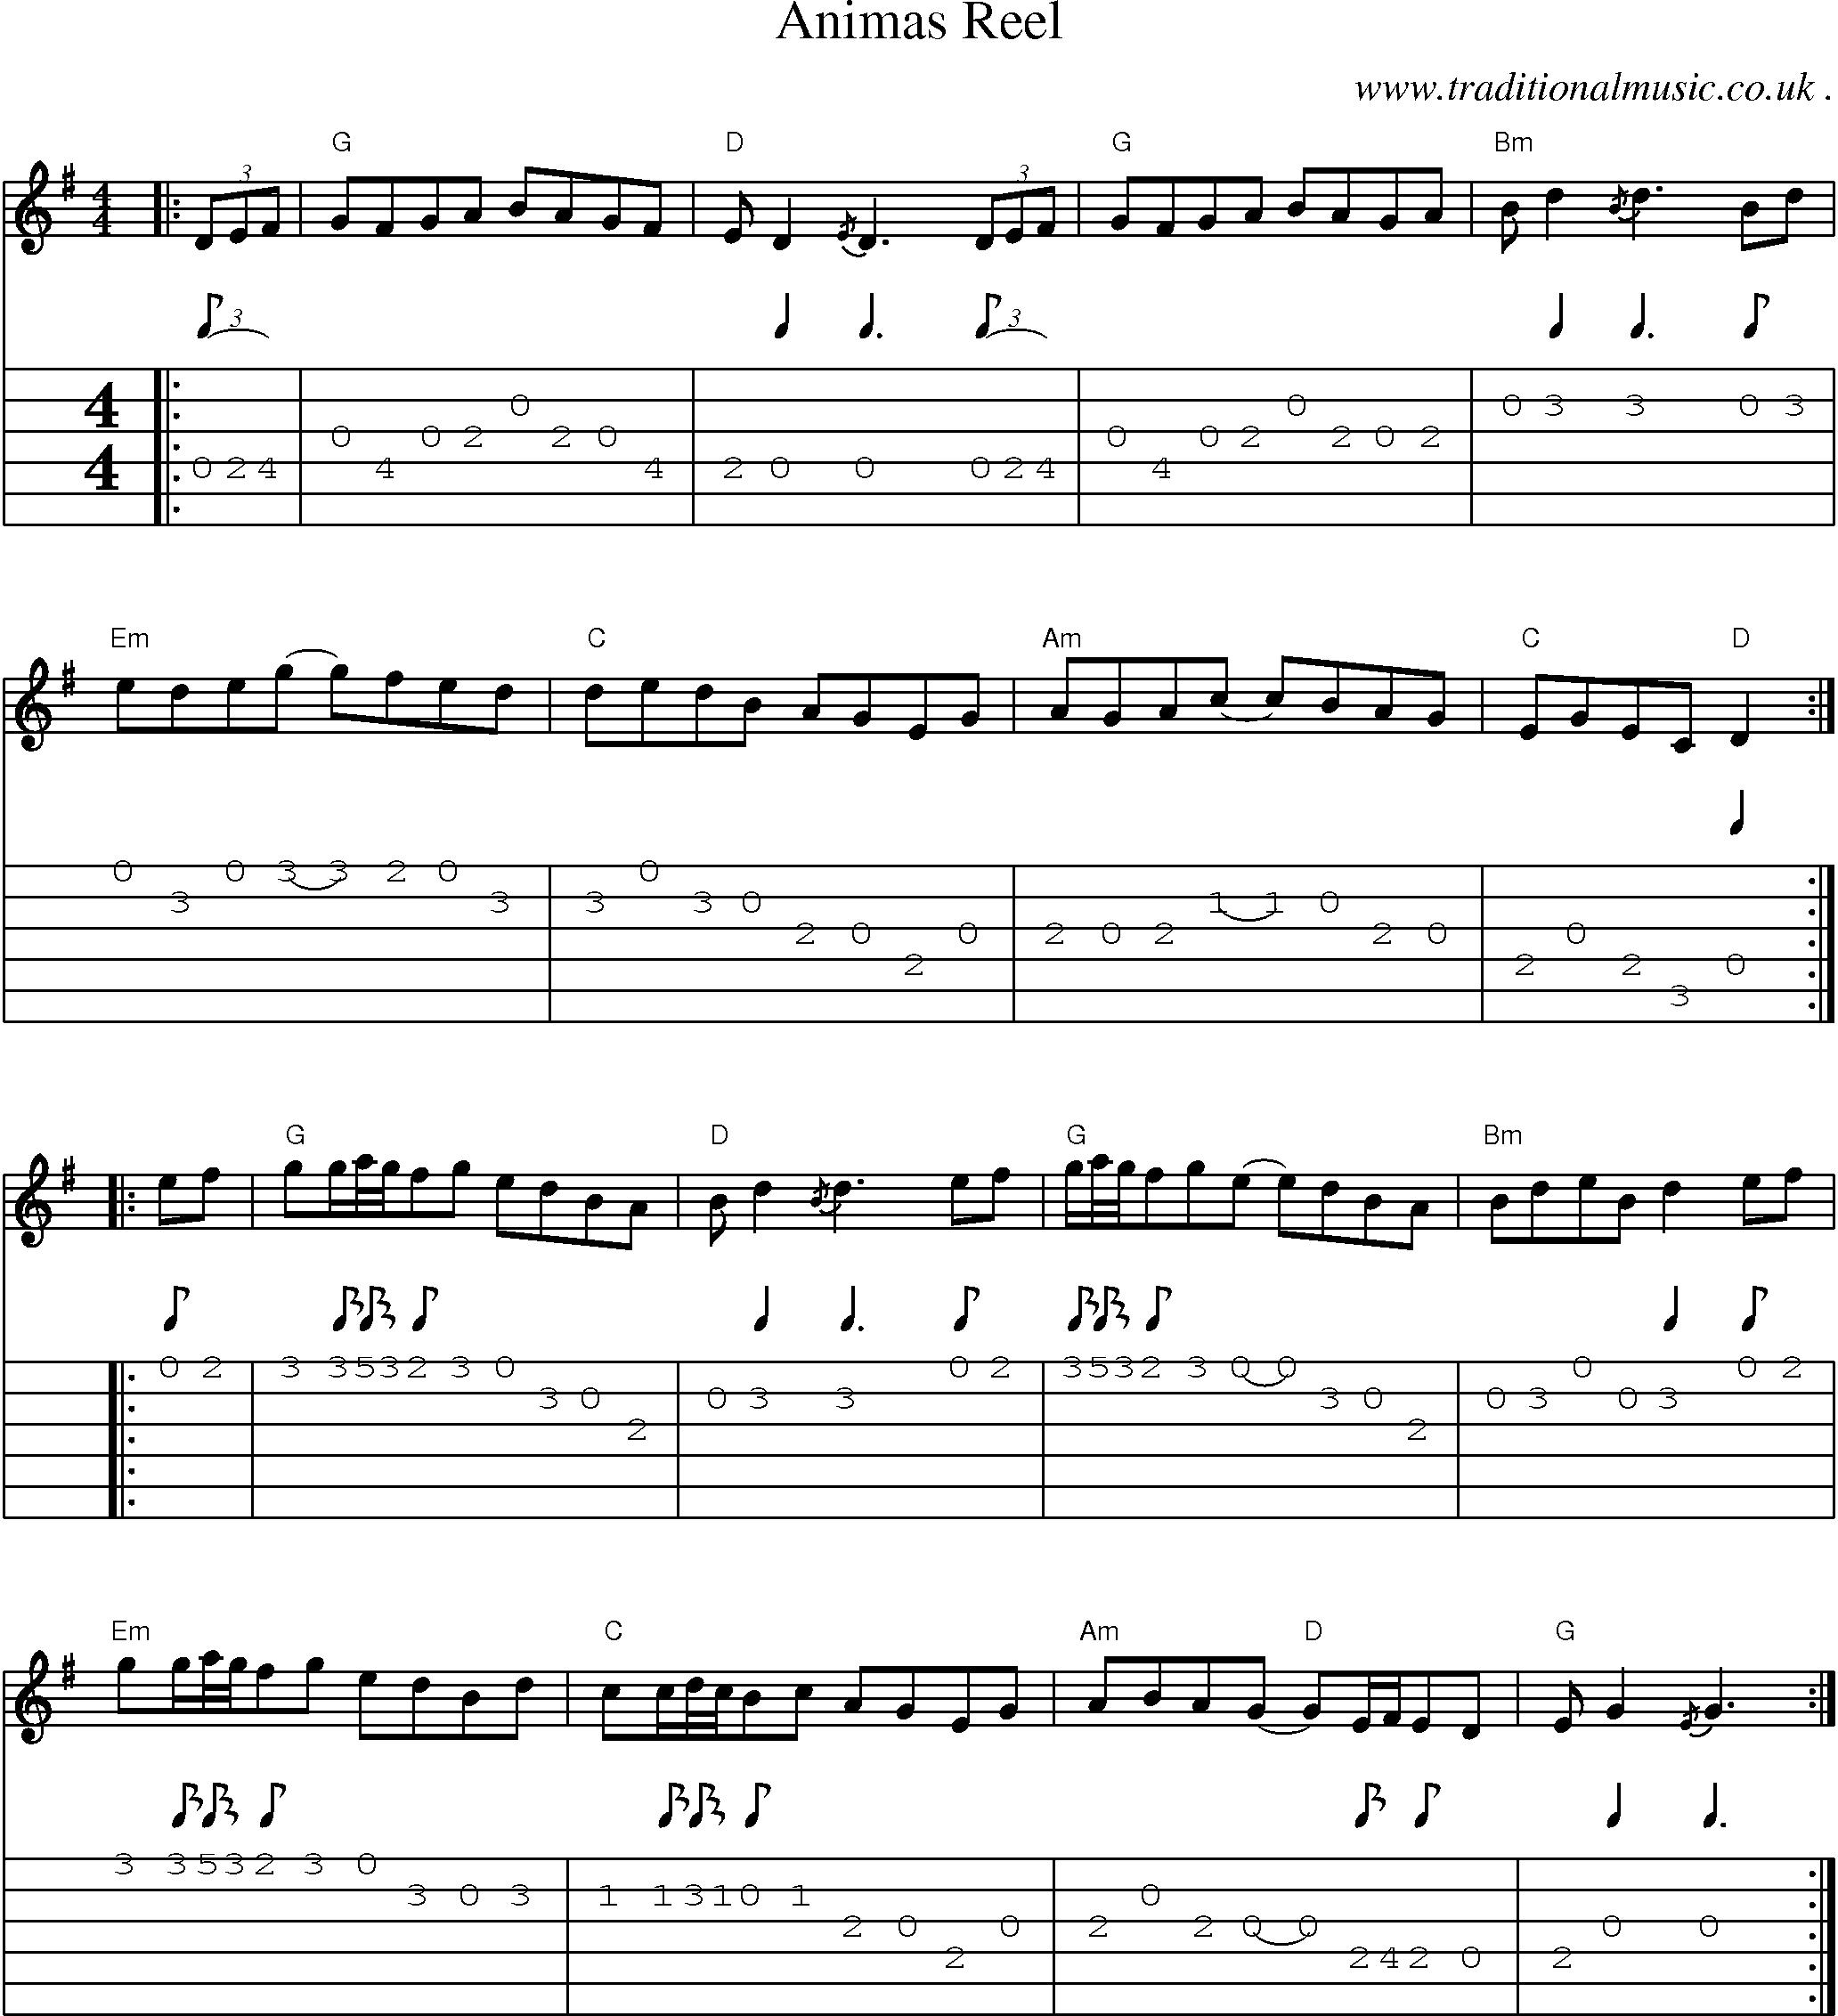 Music Score and Guitar Tabs for Animas Reel